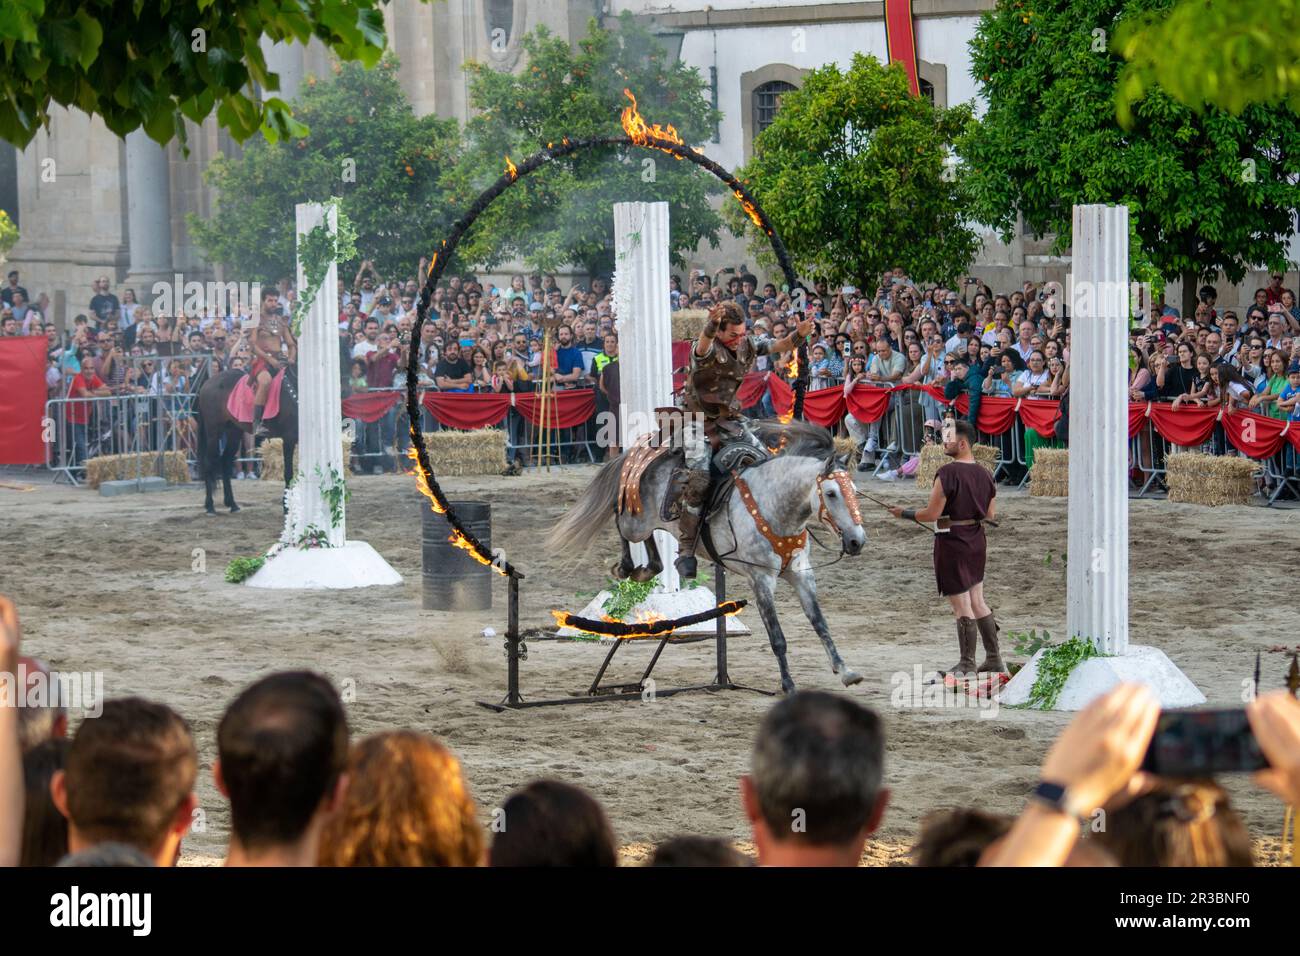 Roman acting, gladiator jumping a ring of fire mounted in his horse with his hands in the air. Outdoor performers. Historical events and representation. Stock Photo